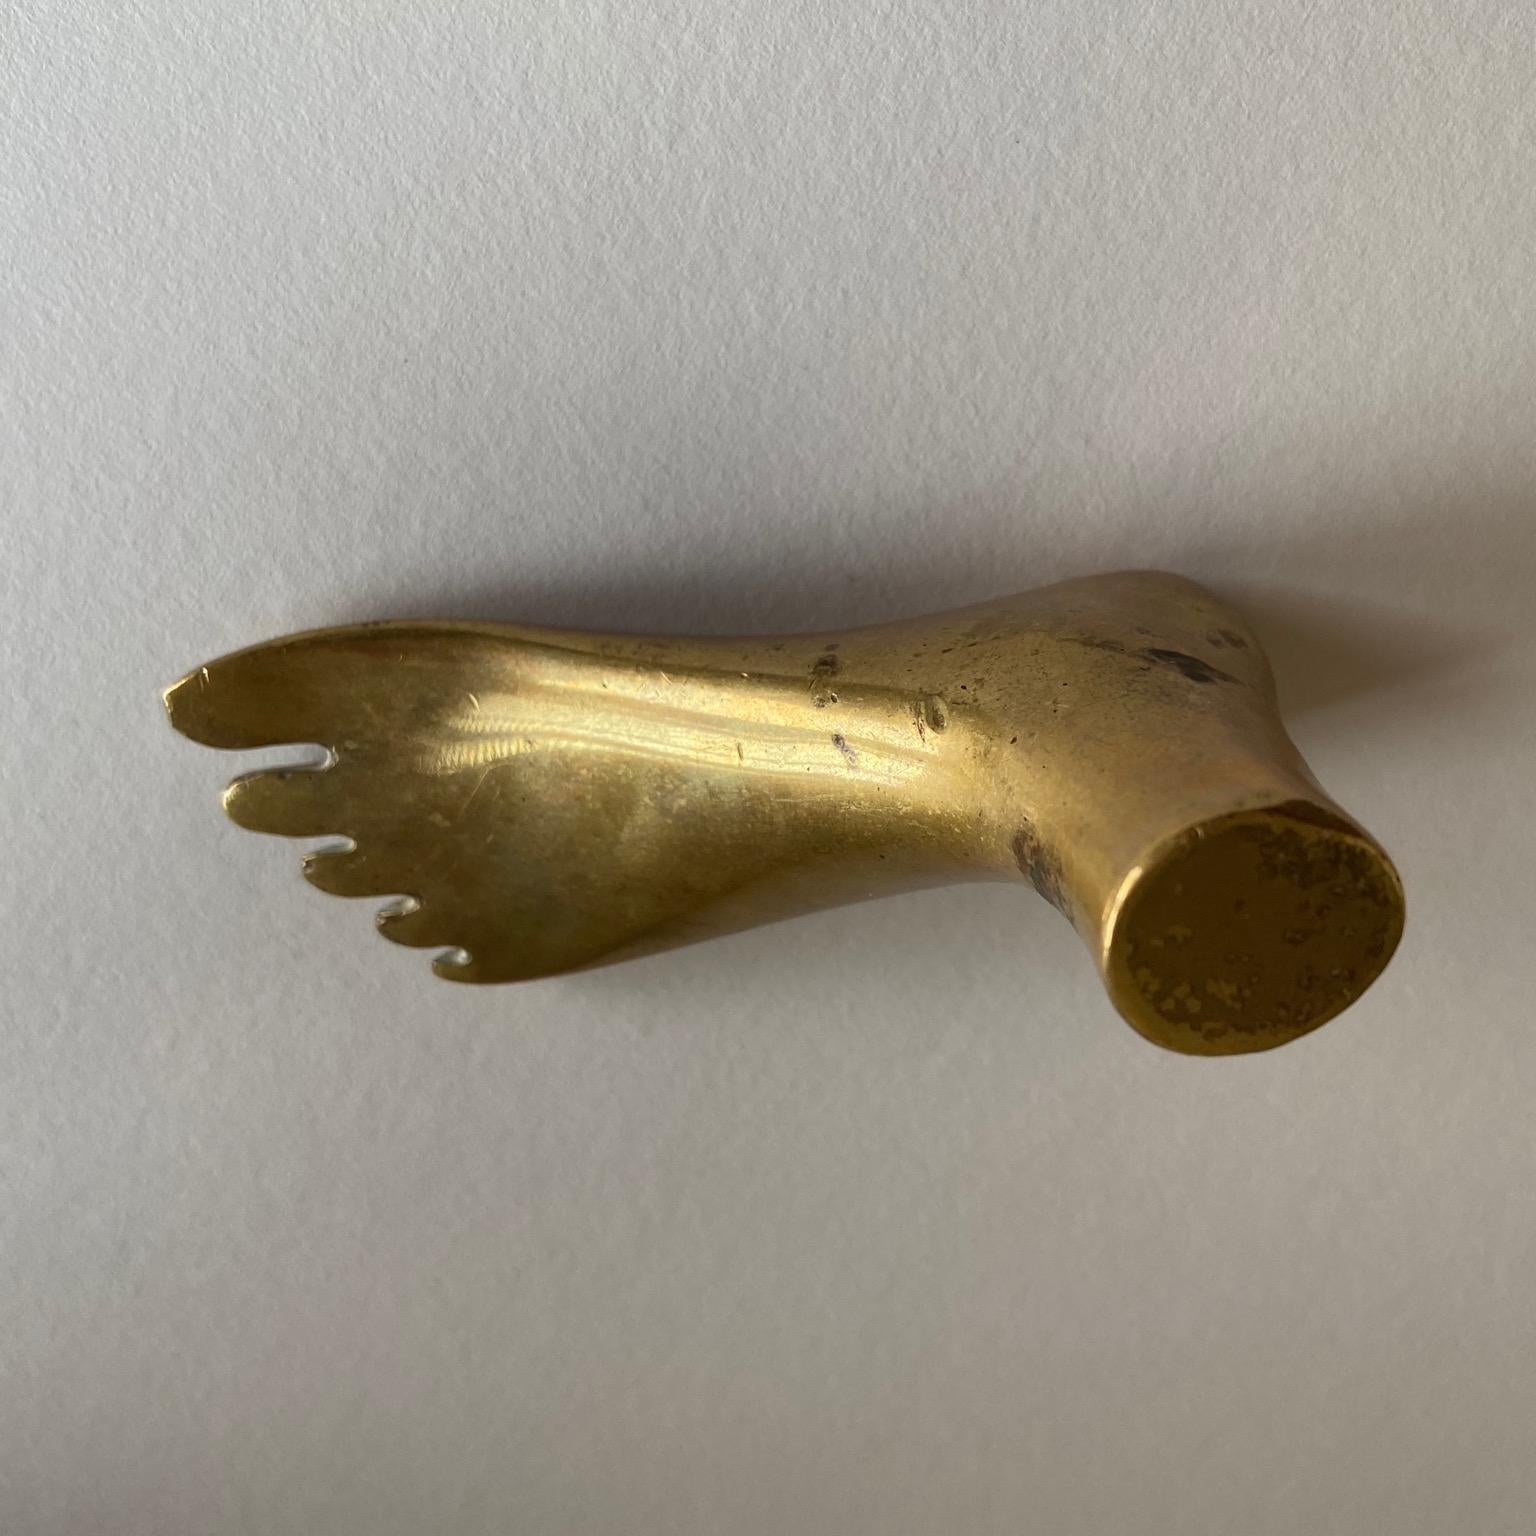 Vintage midcentury brass foot paperweight sculpture by Carl Aubock II.
Impressed Aubock signature as well as 